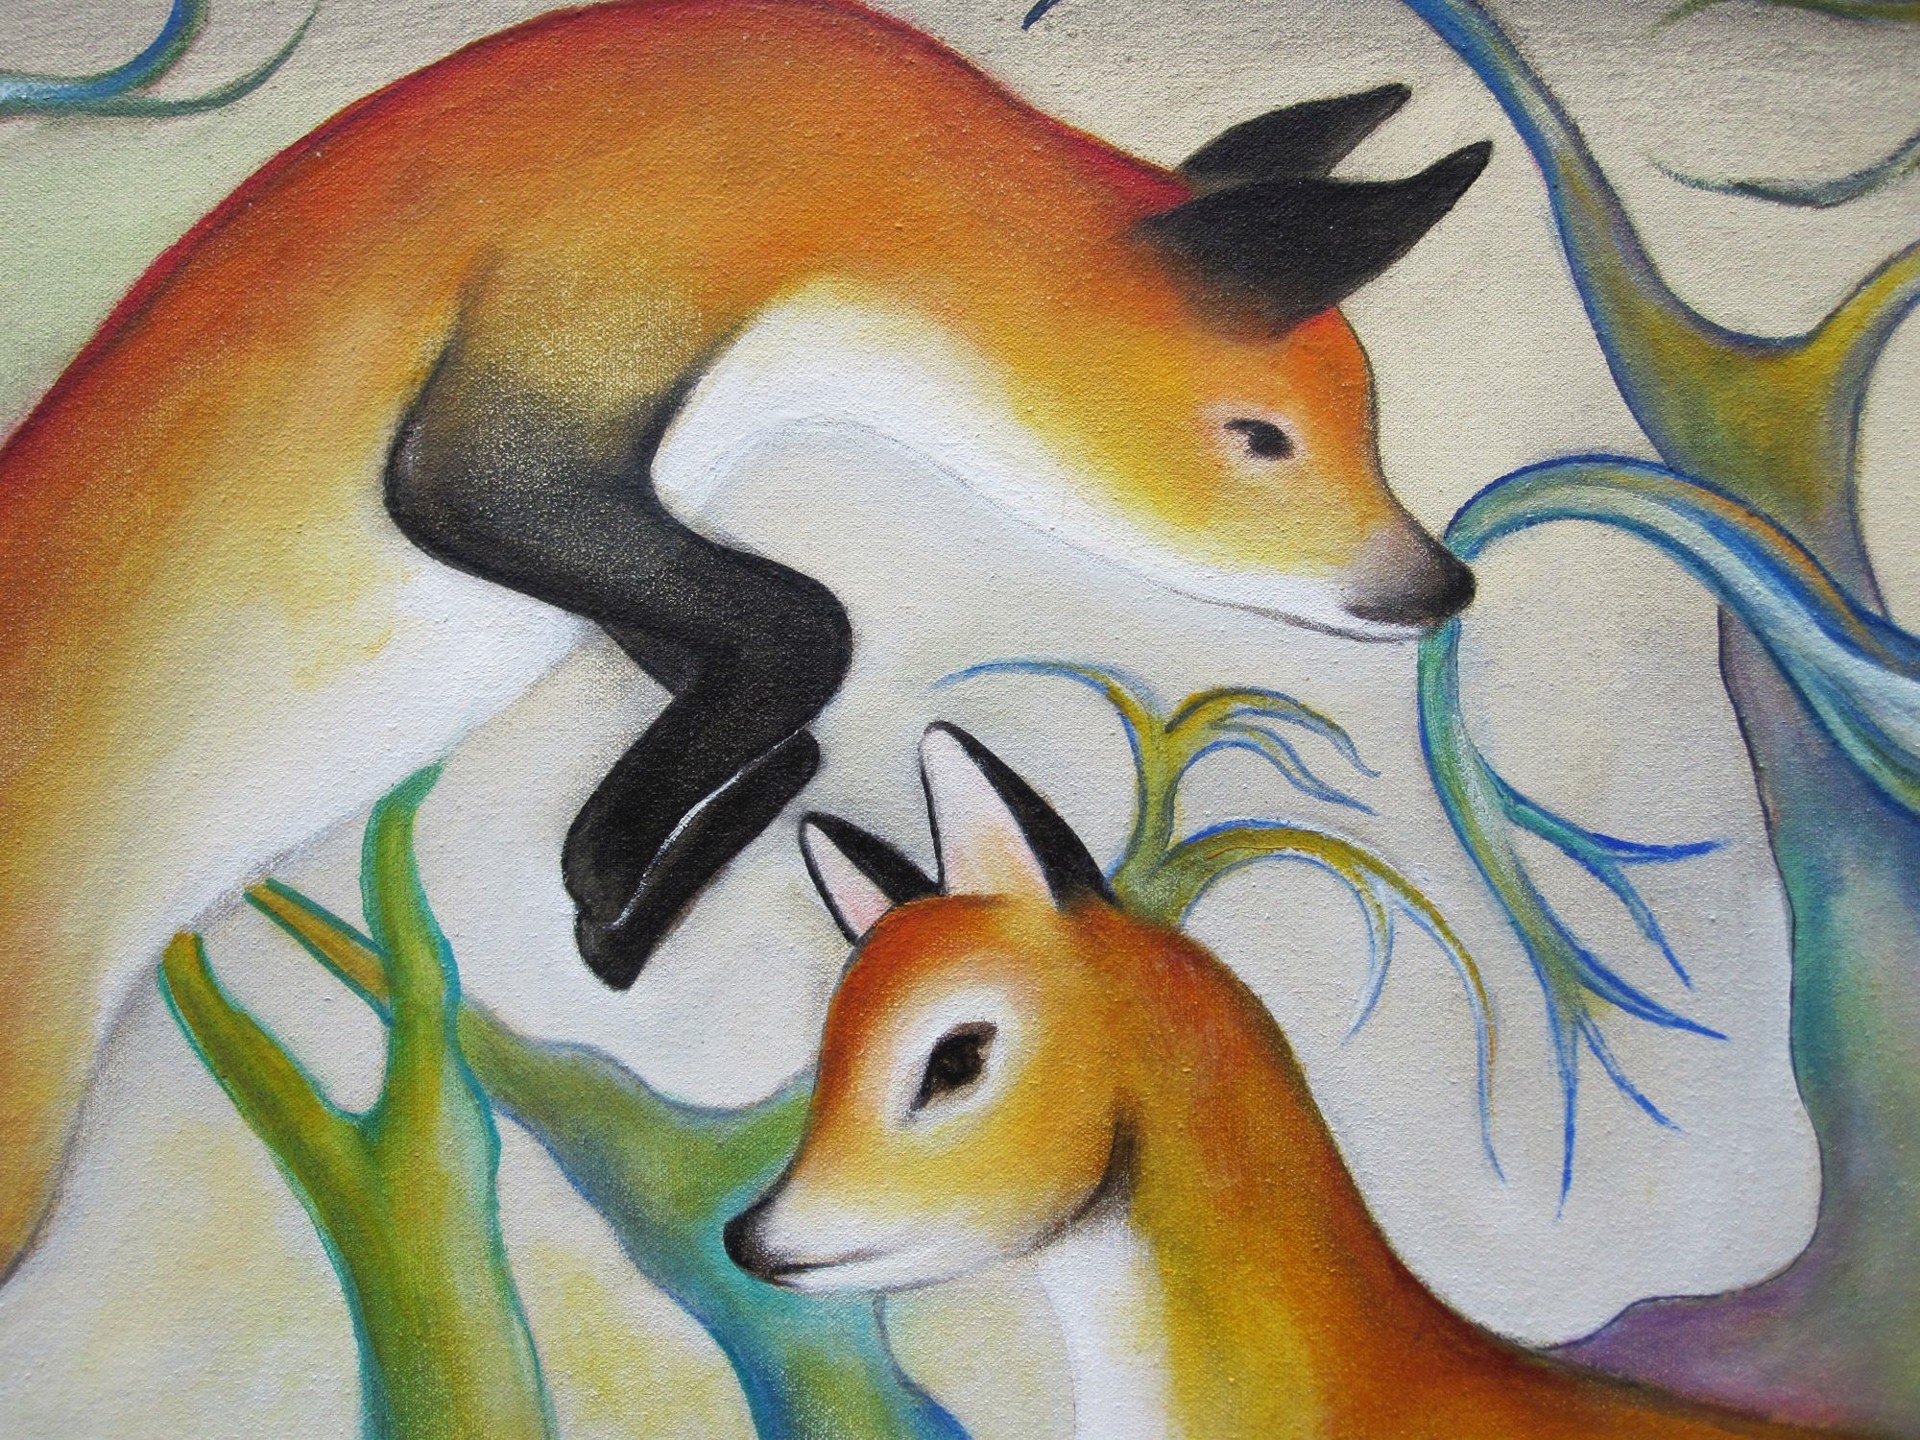 Foxes with Shells by Zoa Ace